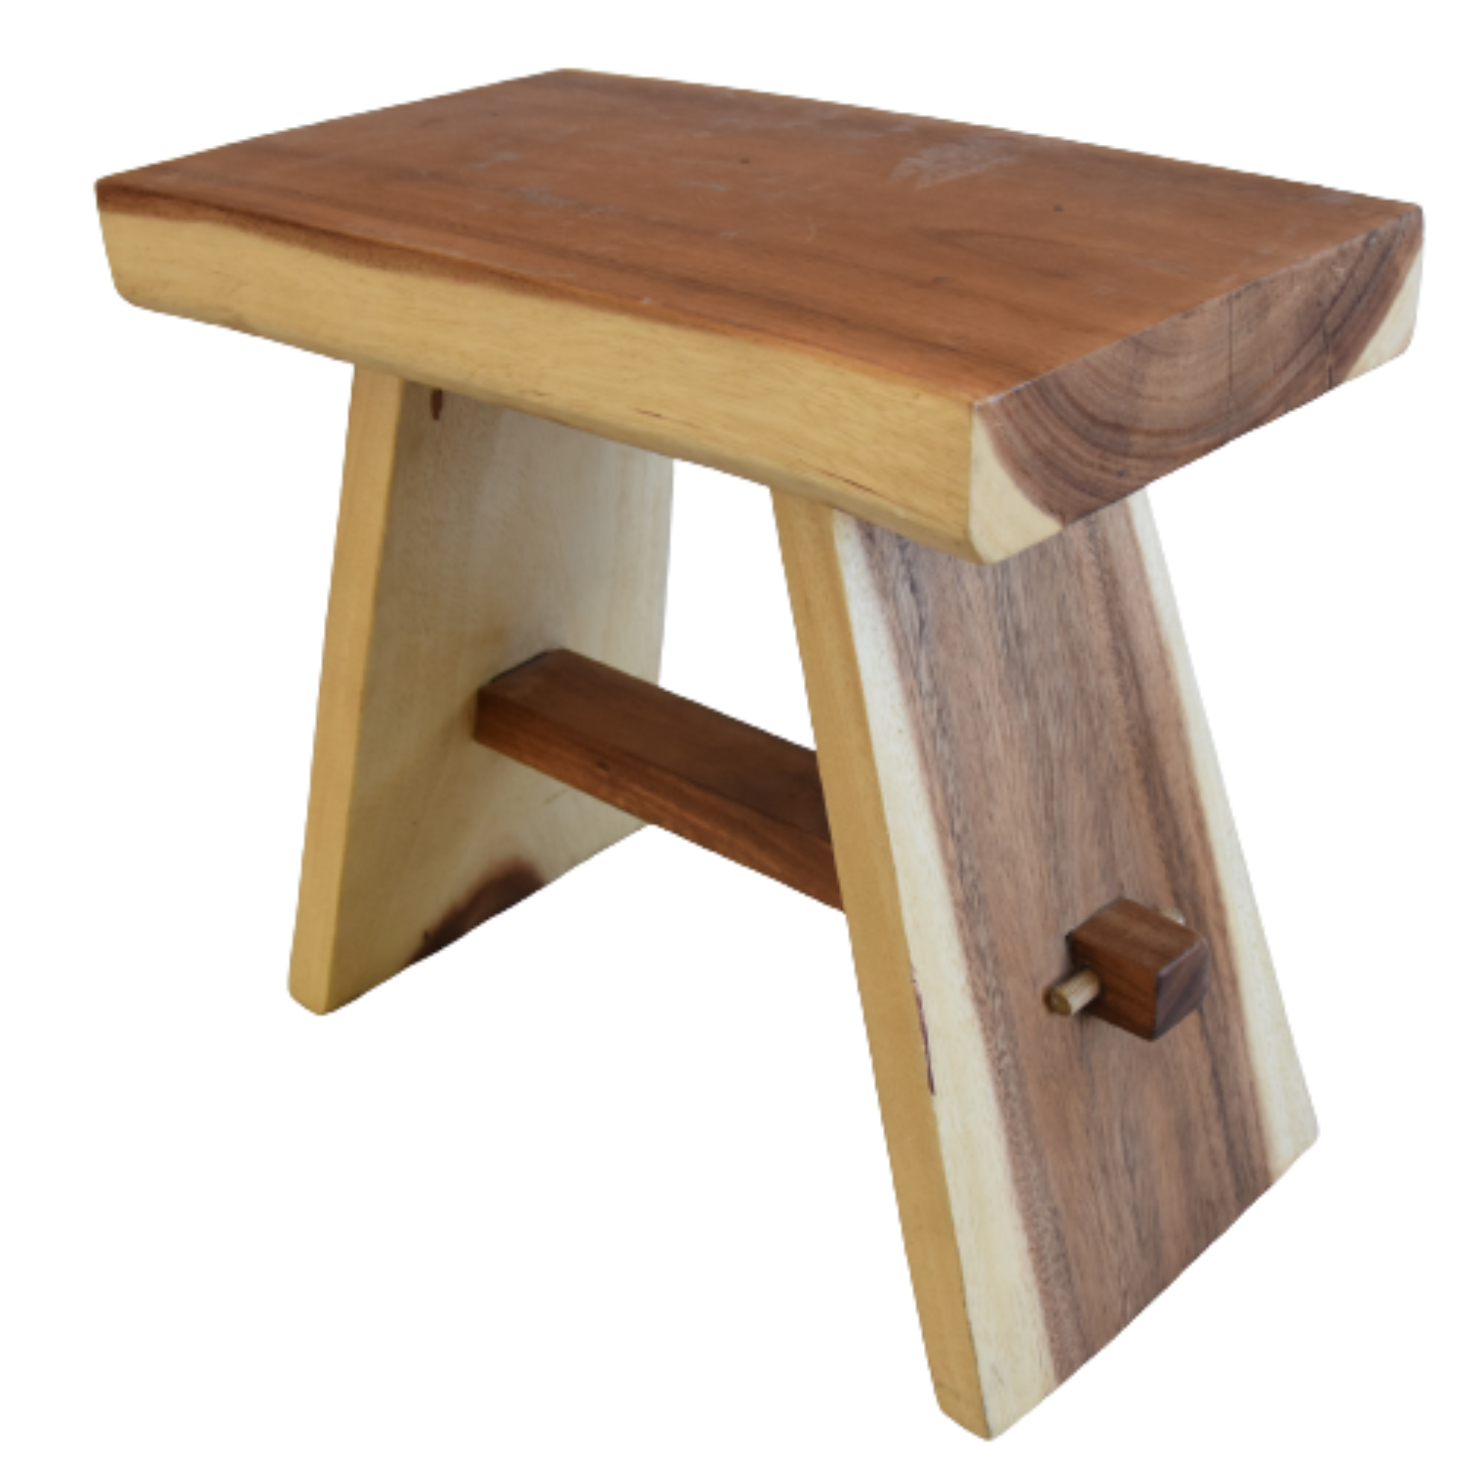 Munger Wood Side Table, Stool, or Bench~P77666870